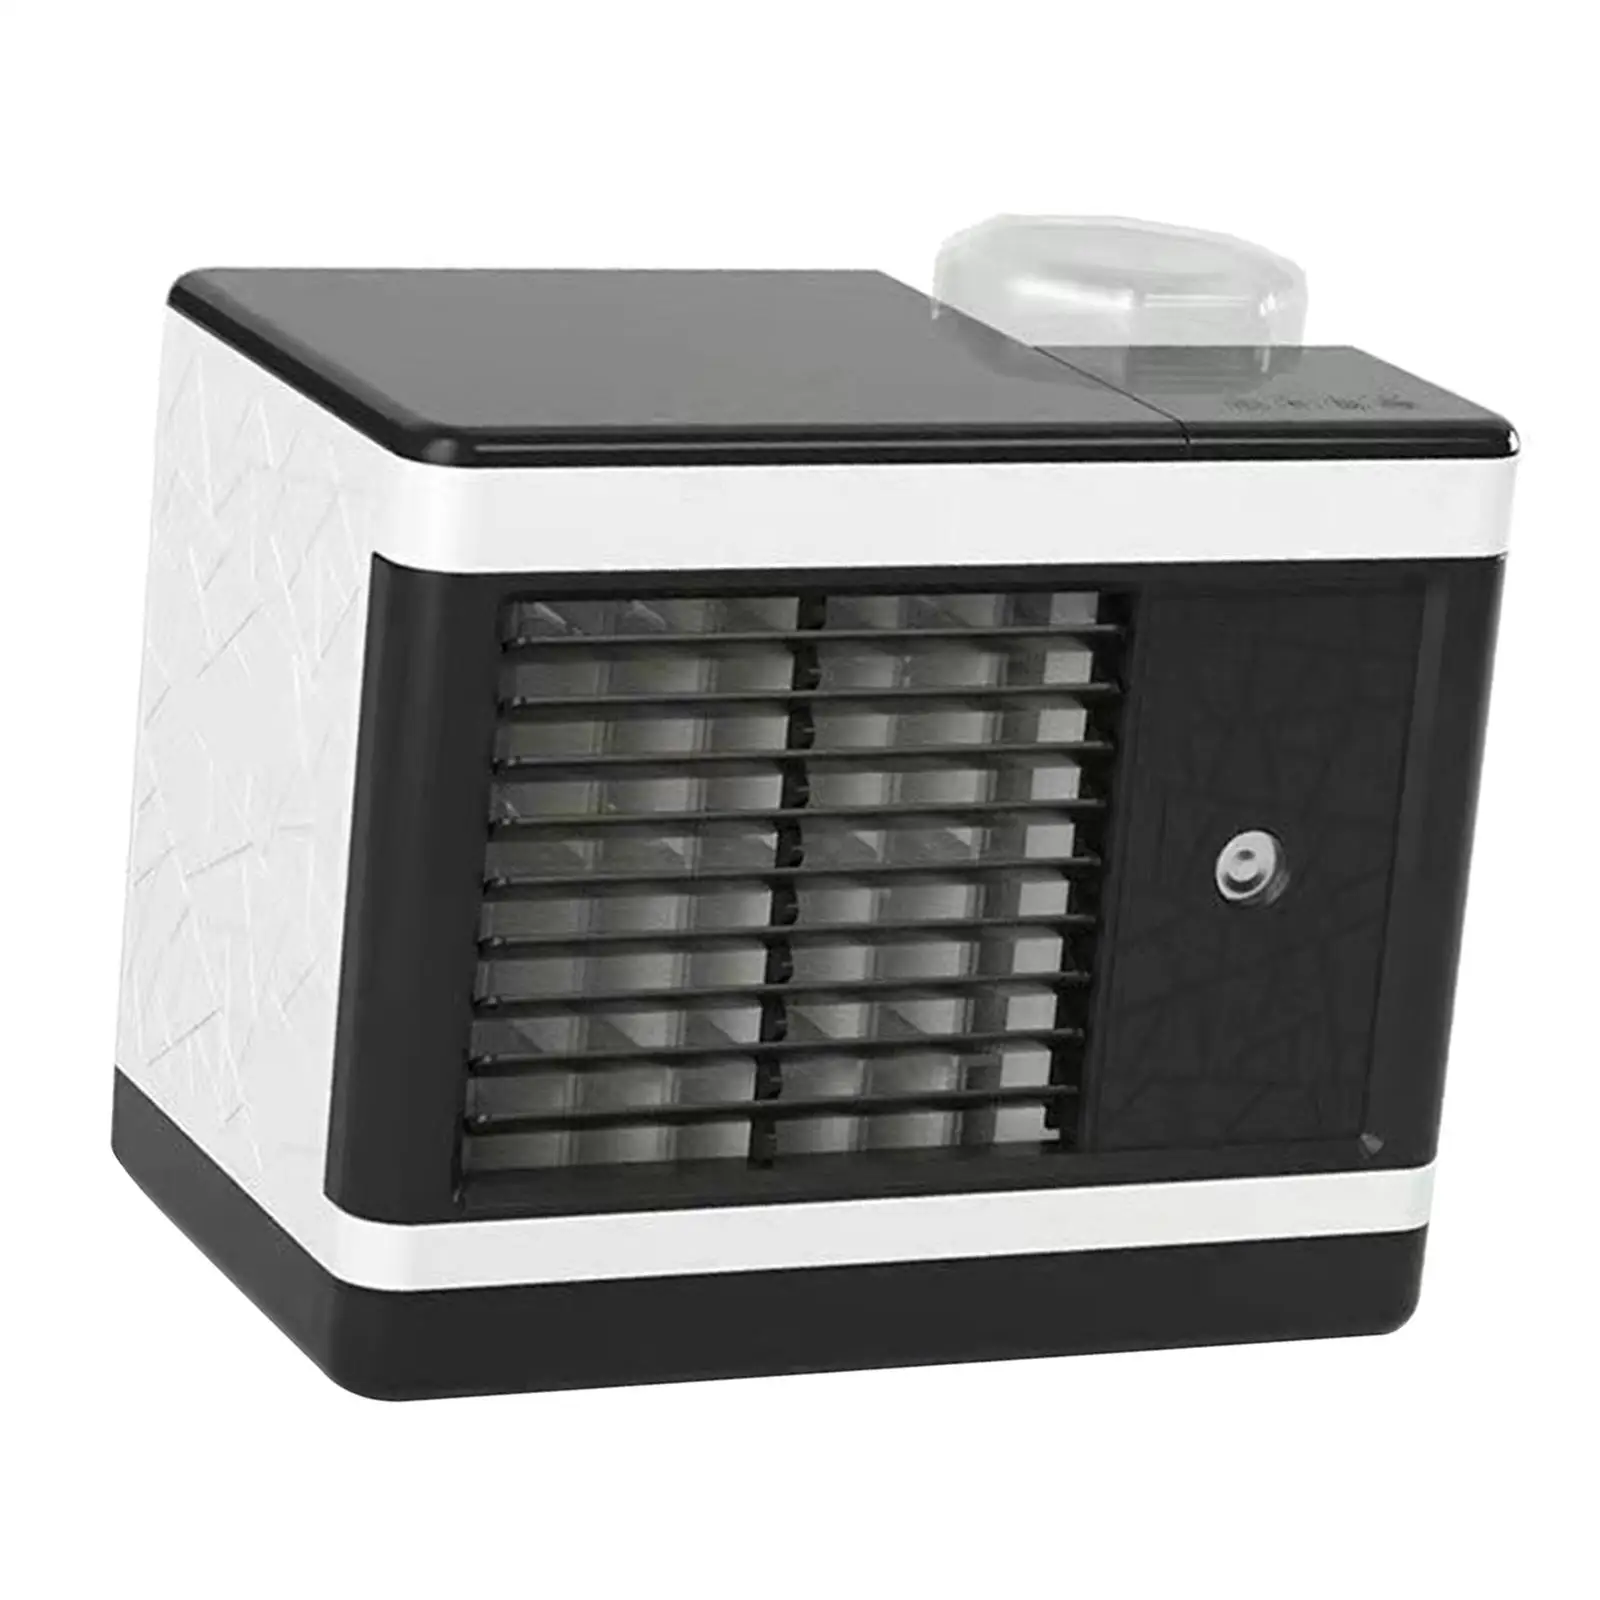 Mini Mini Air Cooler 3 Speed Fan Cooling 5V 12W Water Cooling for Desk Office Bedroom